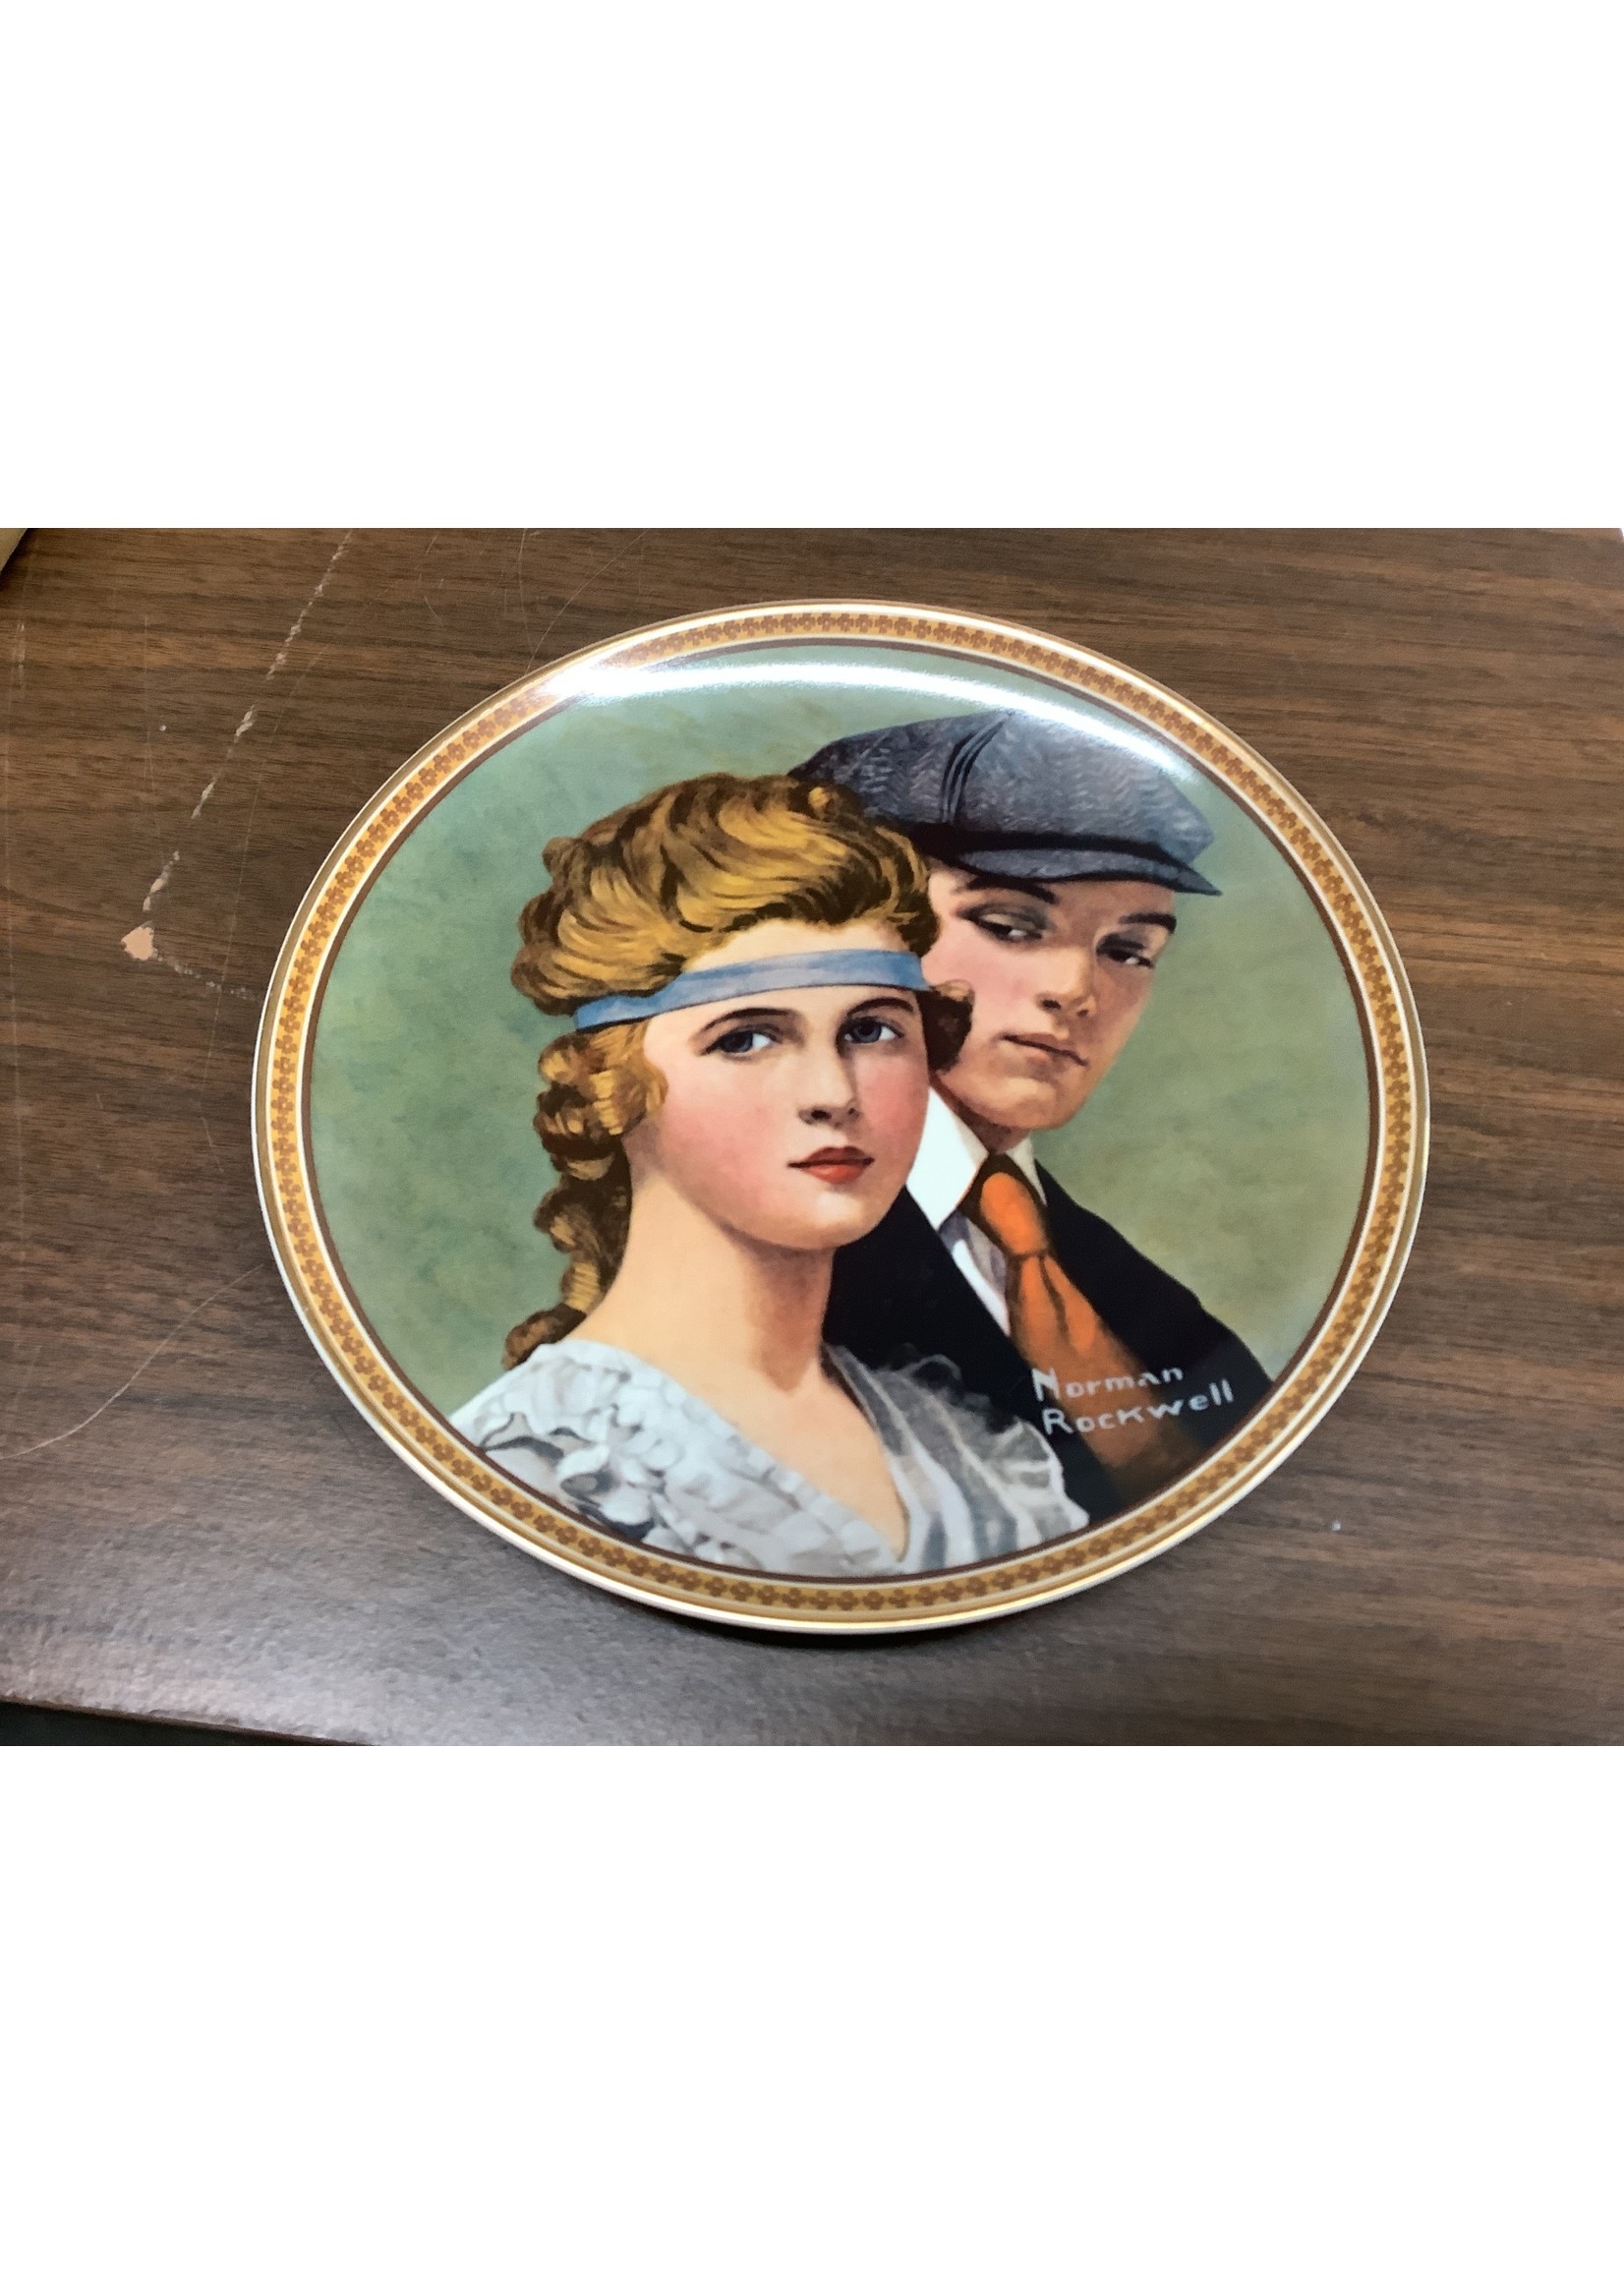 The Bradford Exchange Collectors Plate “Meeting on the Path” Bradex-No. 84-R70-4.18